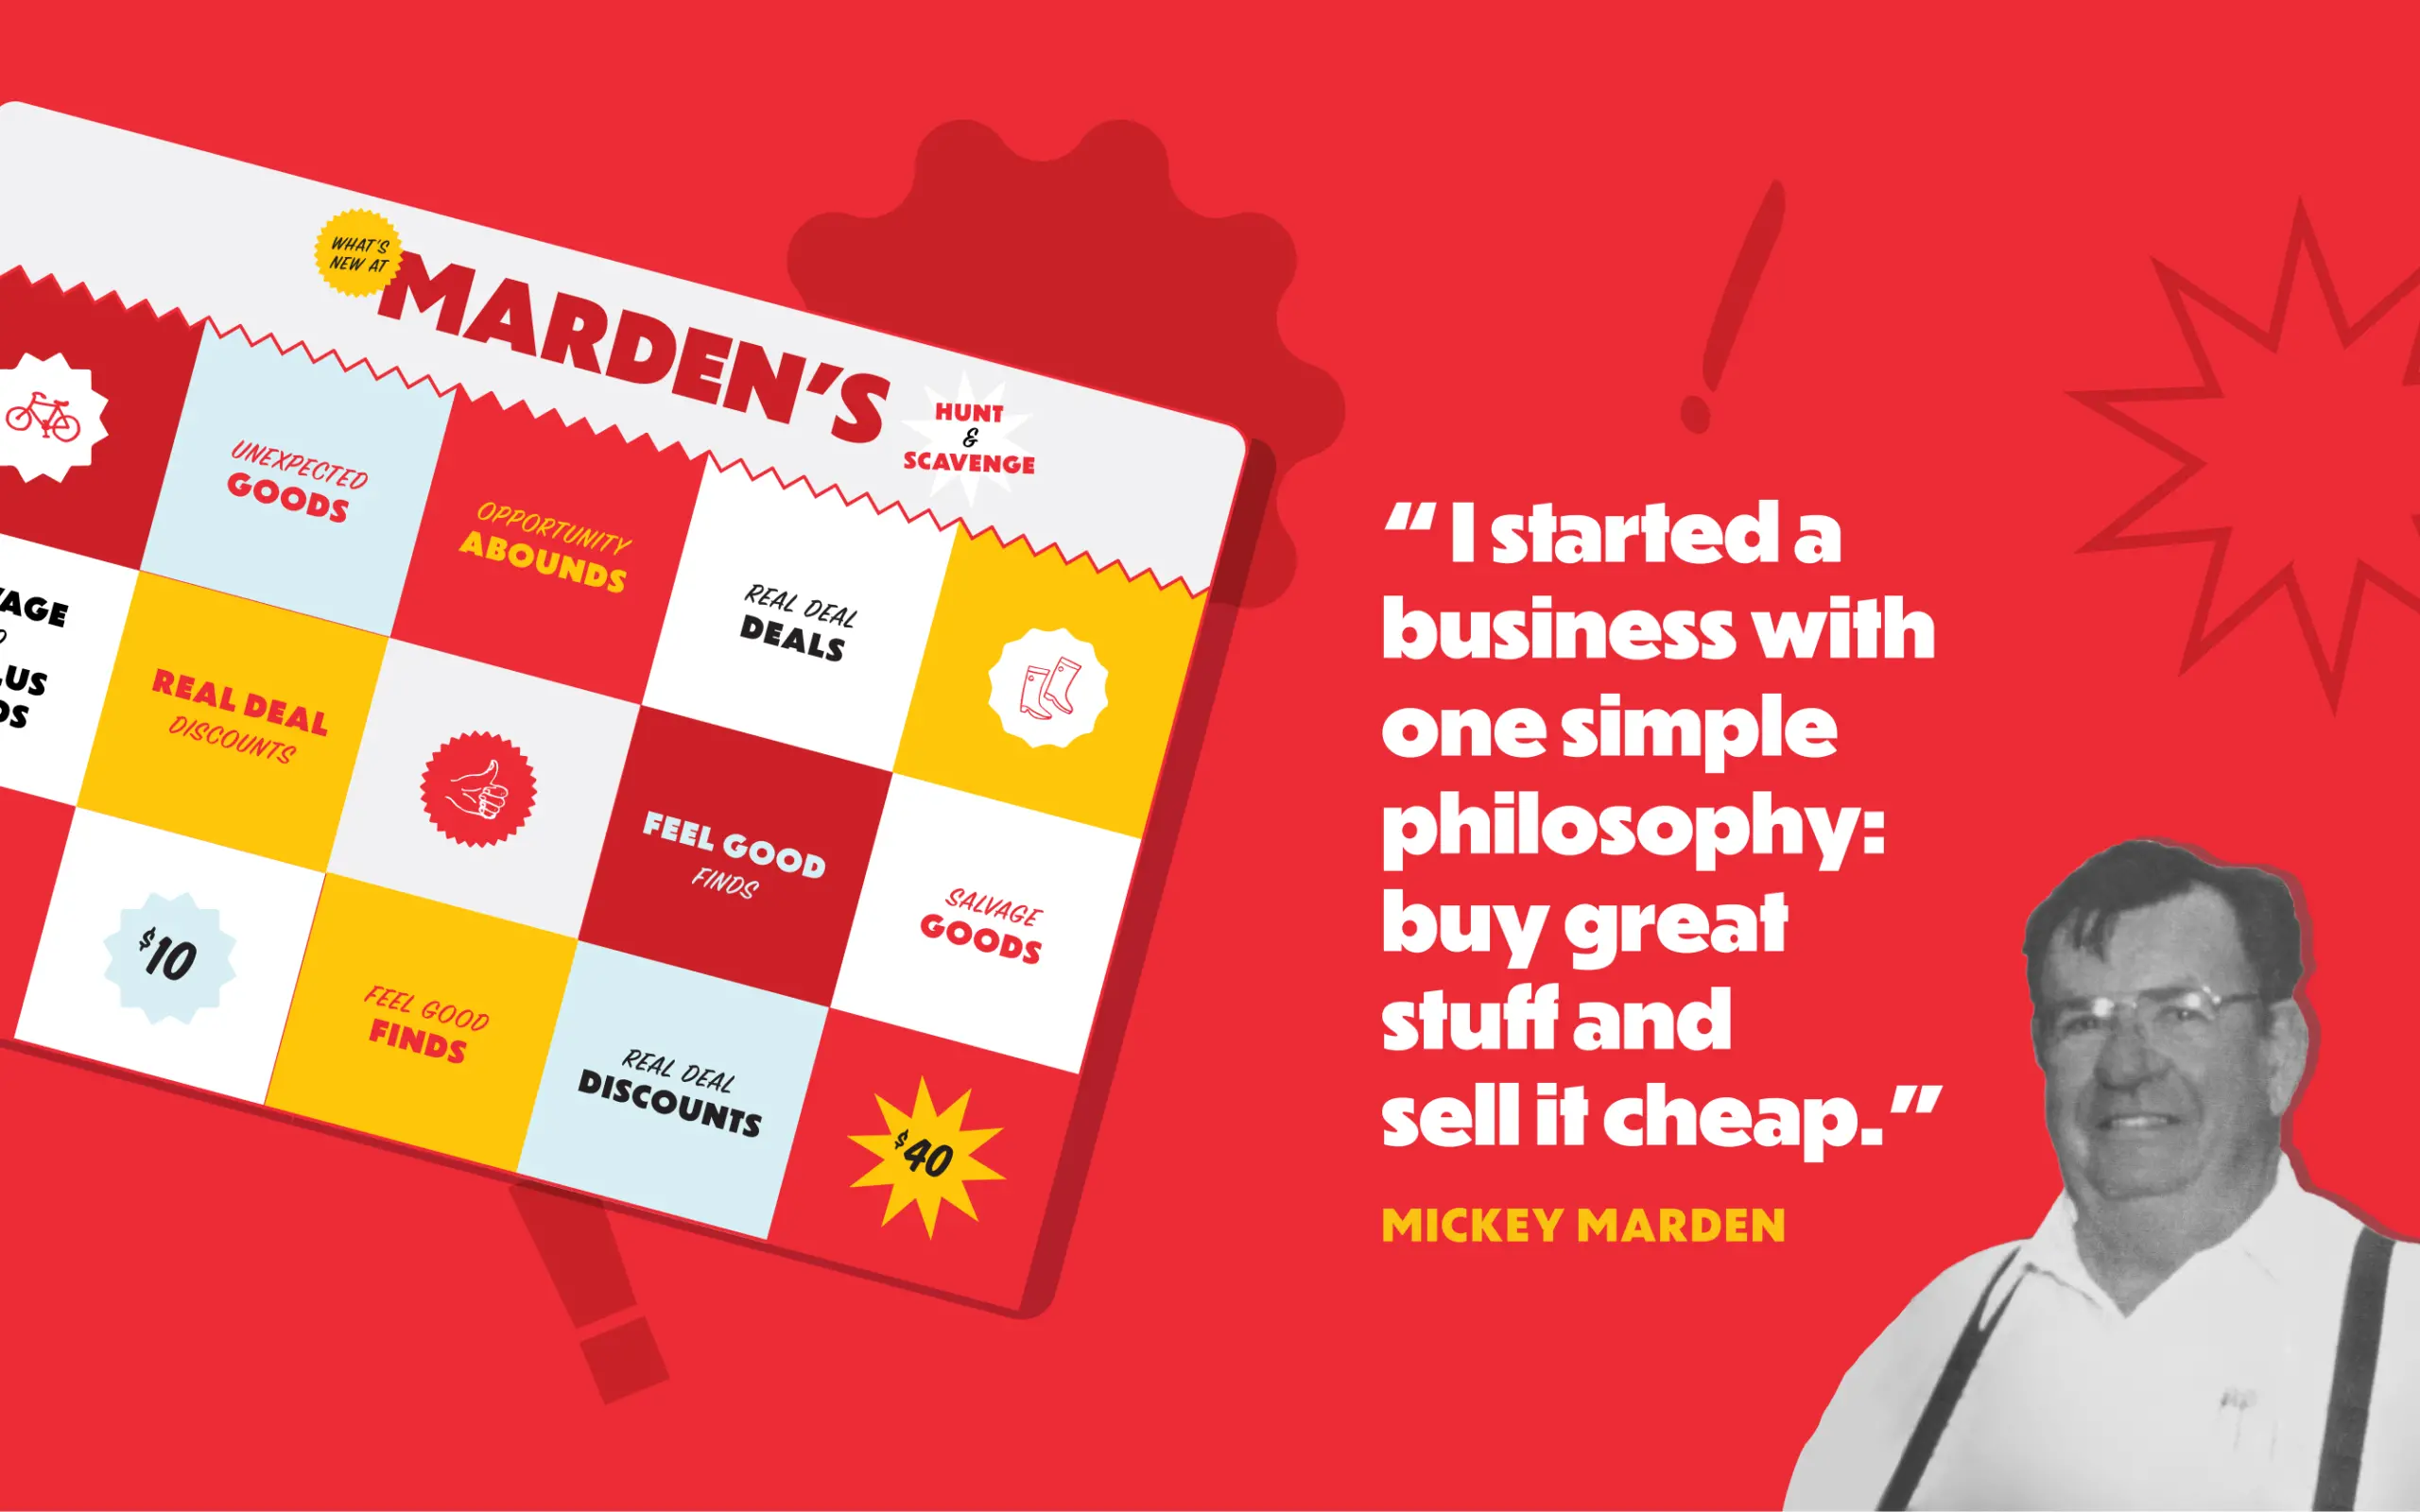 Marden's brand design and Mickey Marden quote that says "I started a business with one simple philosophy: buy great stuff and sell it cheap." 